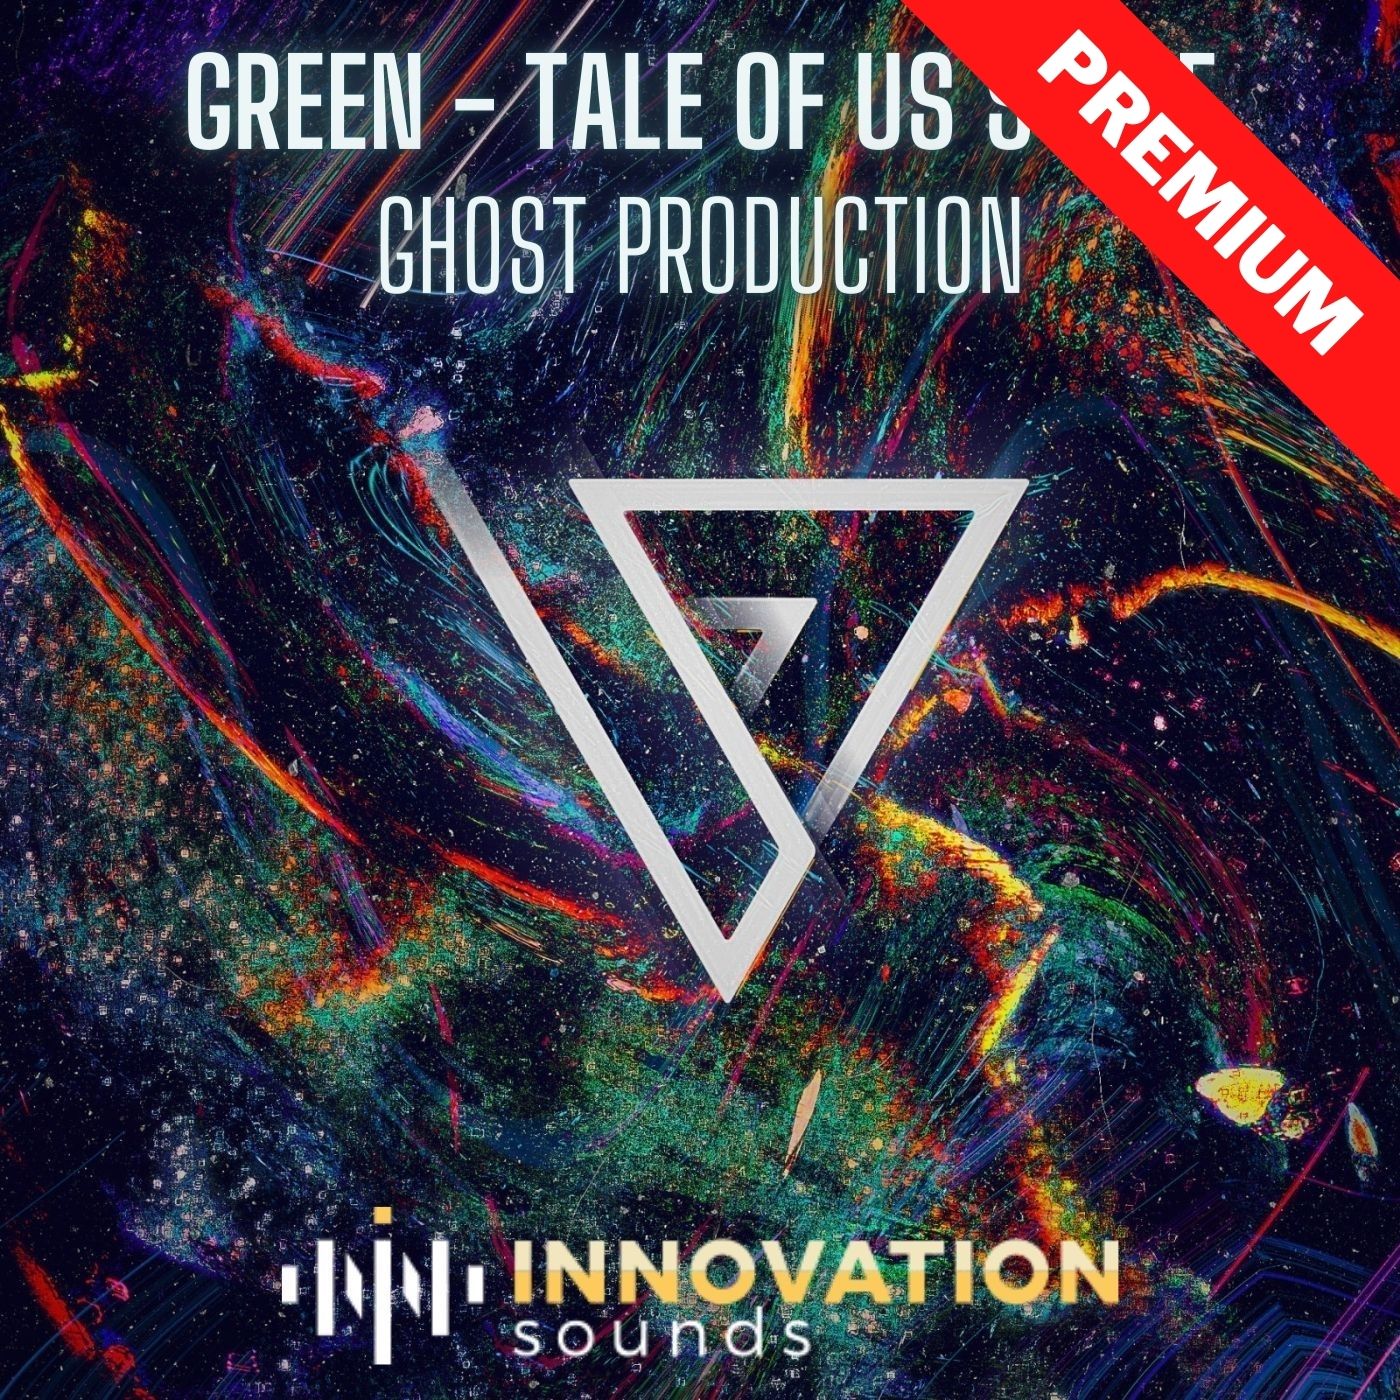 Green - Tale Of Us Style Techno Ghost Production